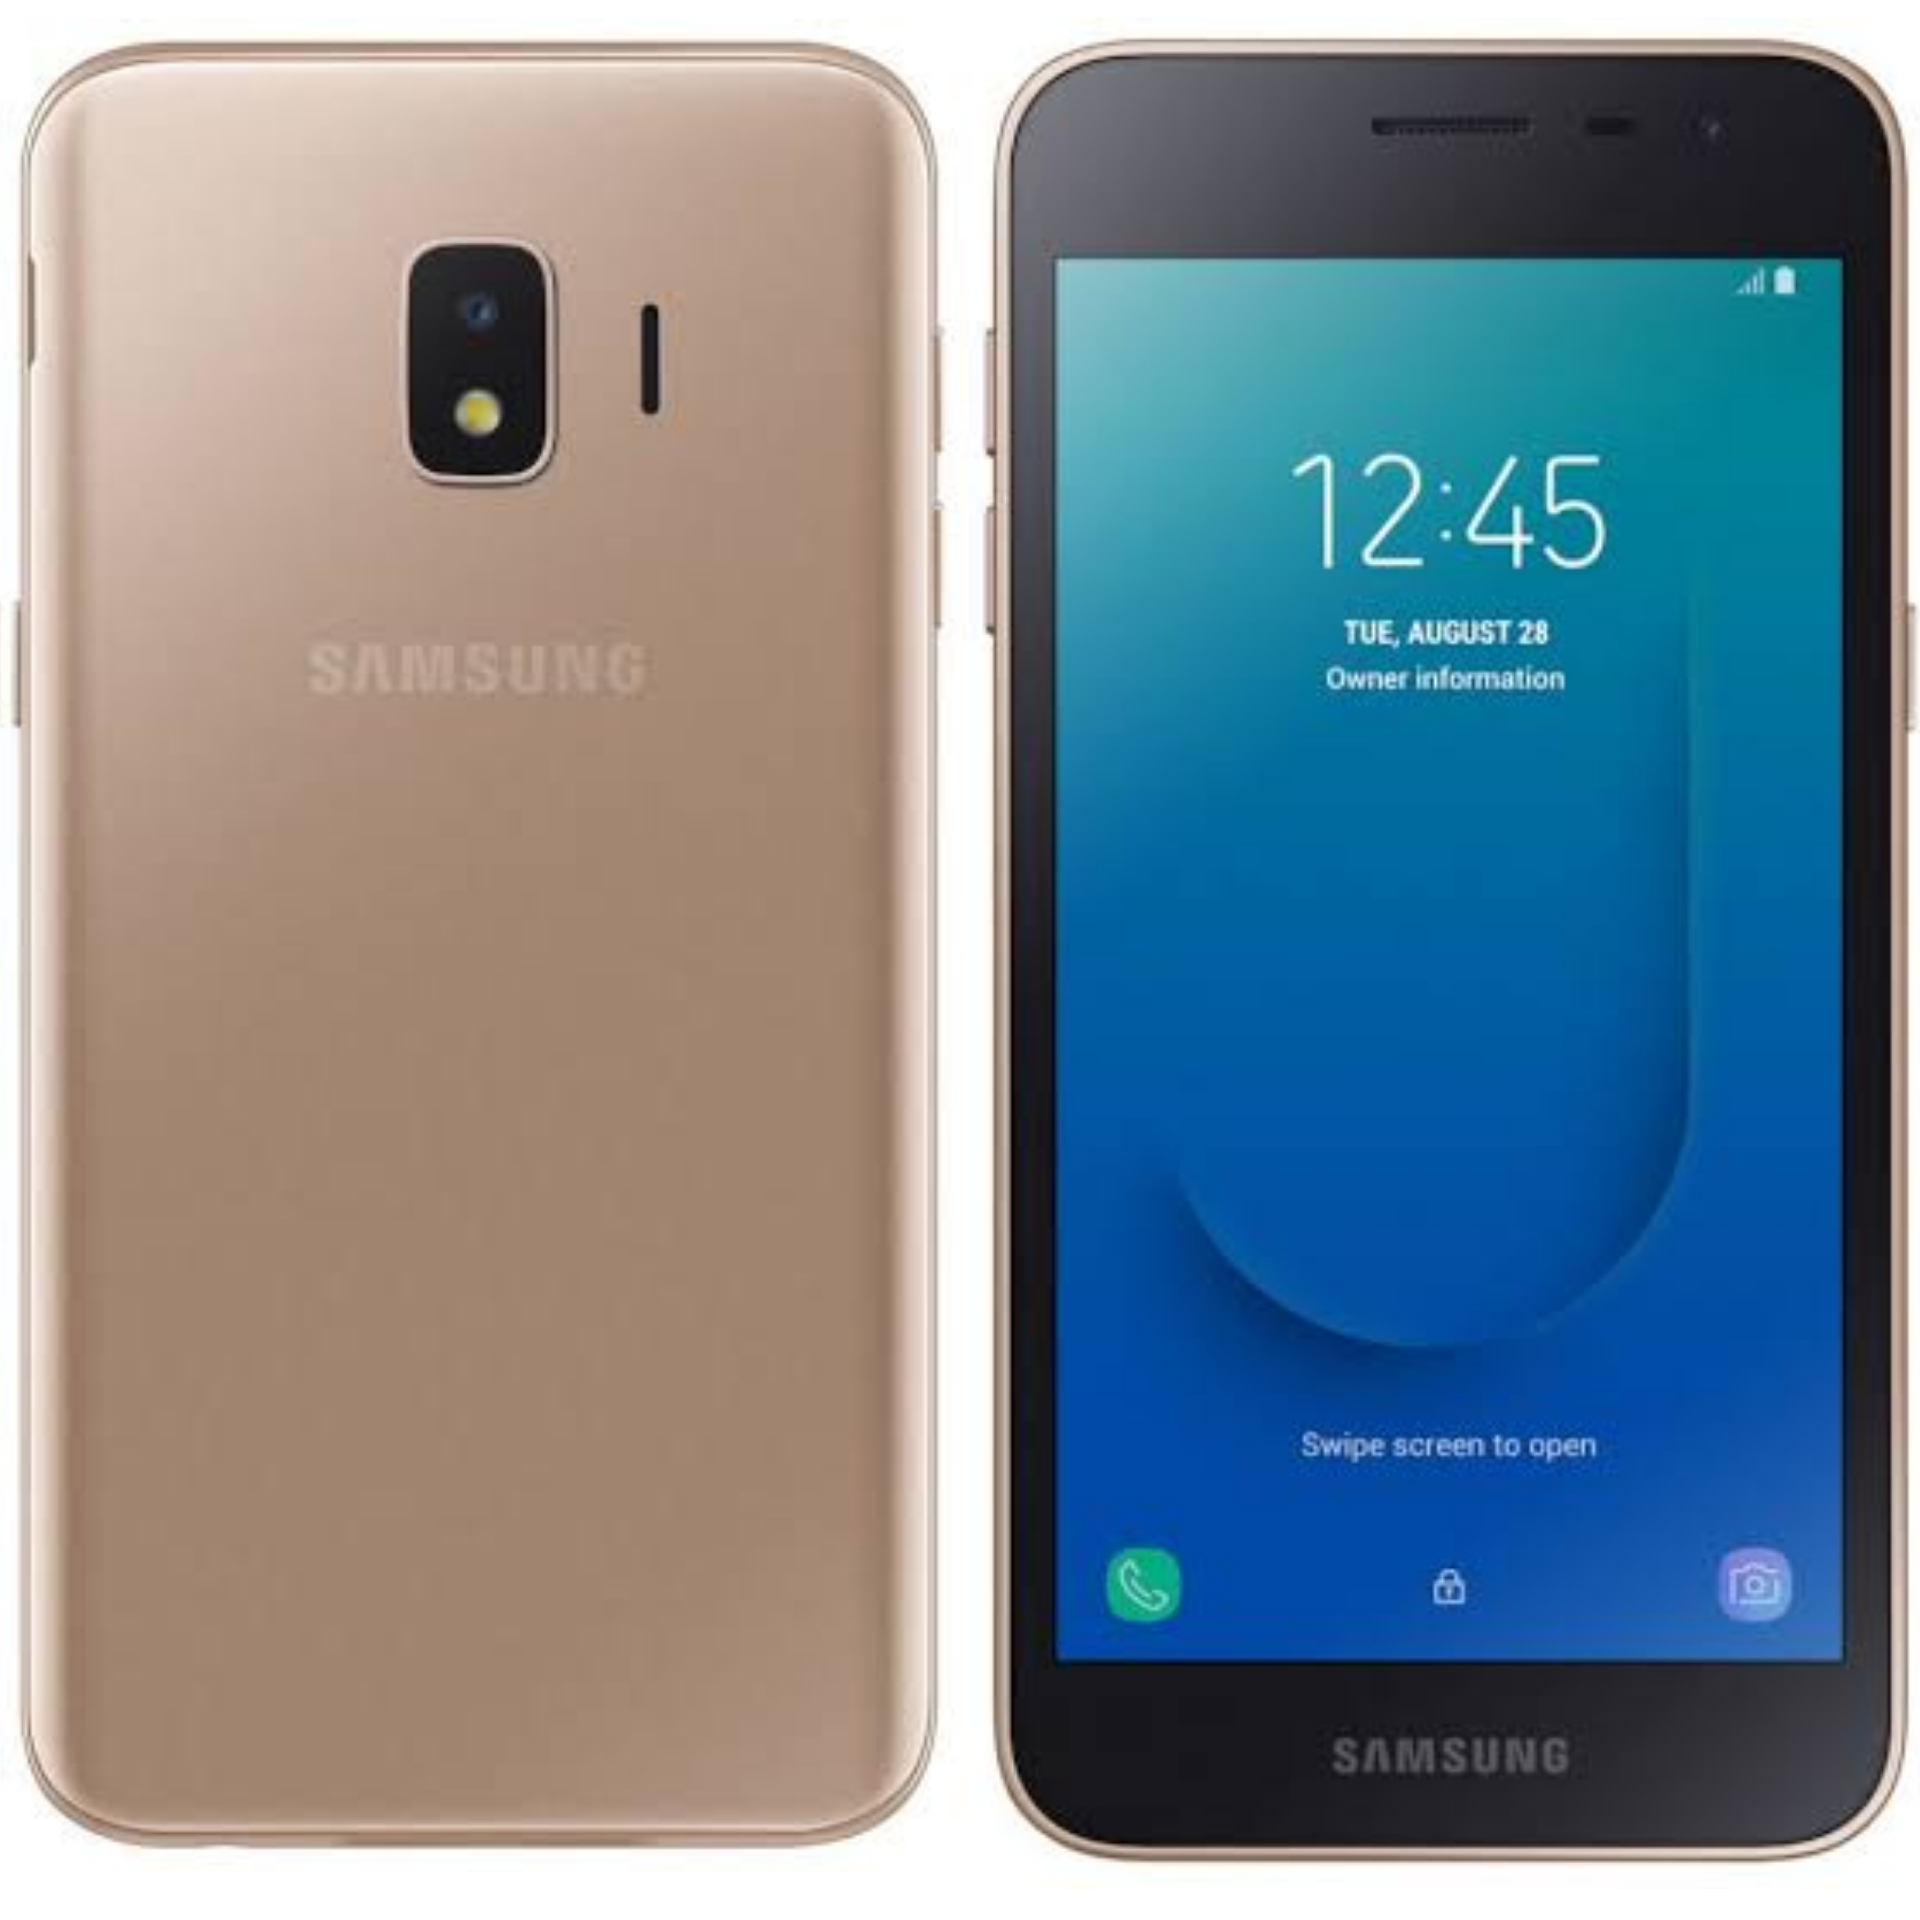 Samsung Galaxy J2 Core Specs, Video Review and Price